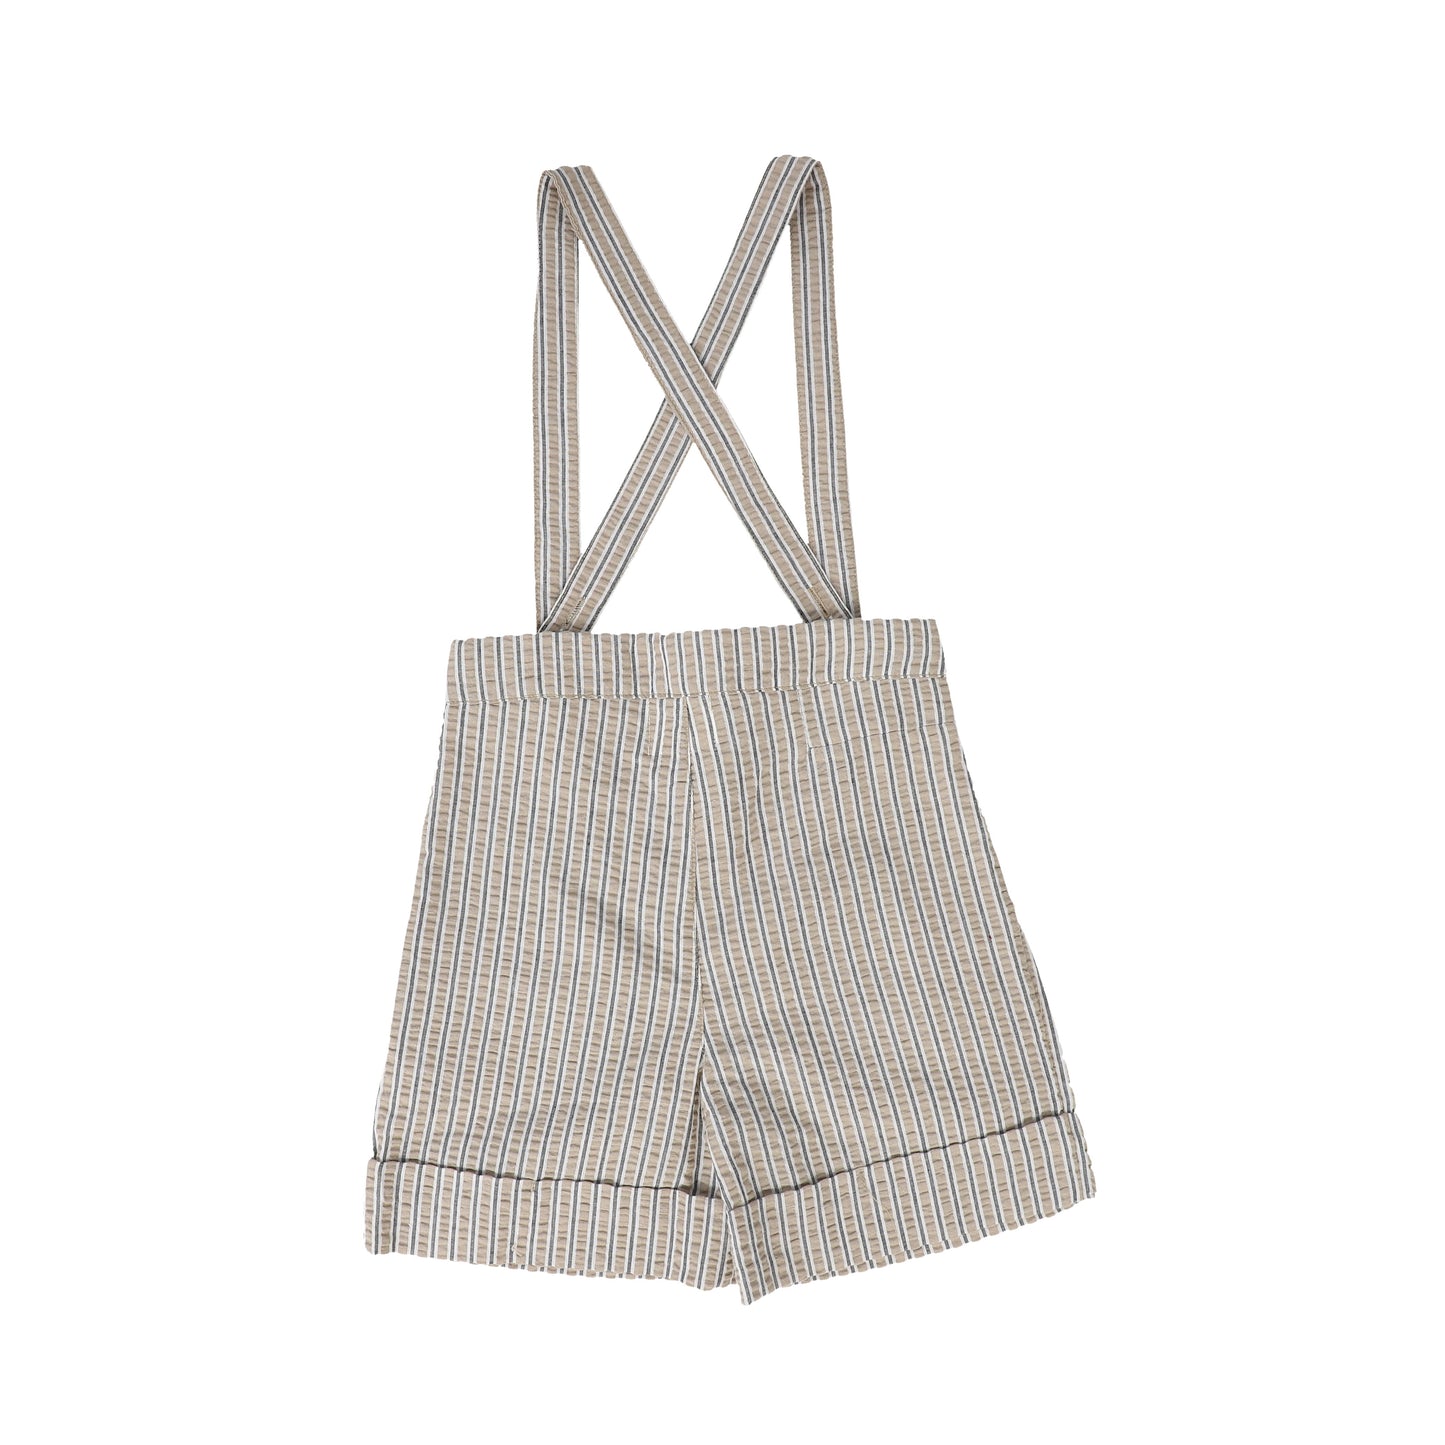 BACE COLLECTION WHITE/TAN THICK STRIPED SUSPENDER SHORTS